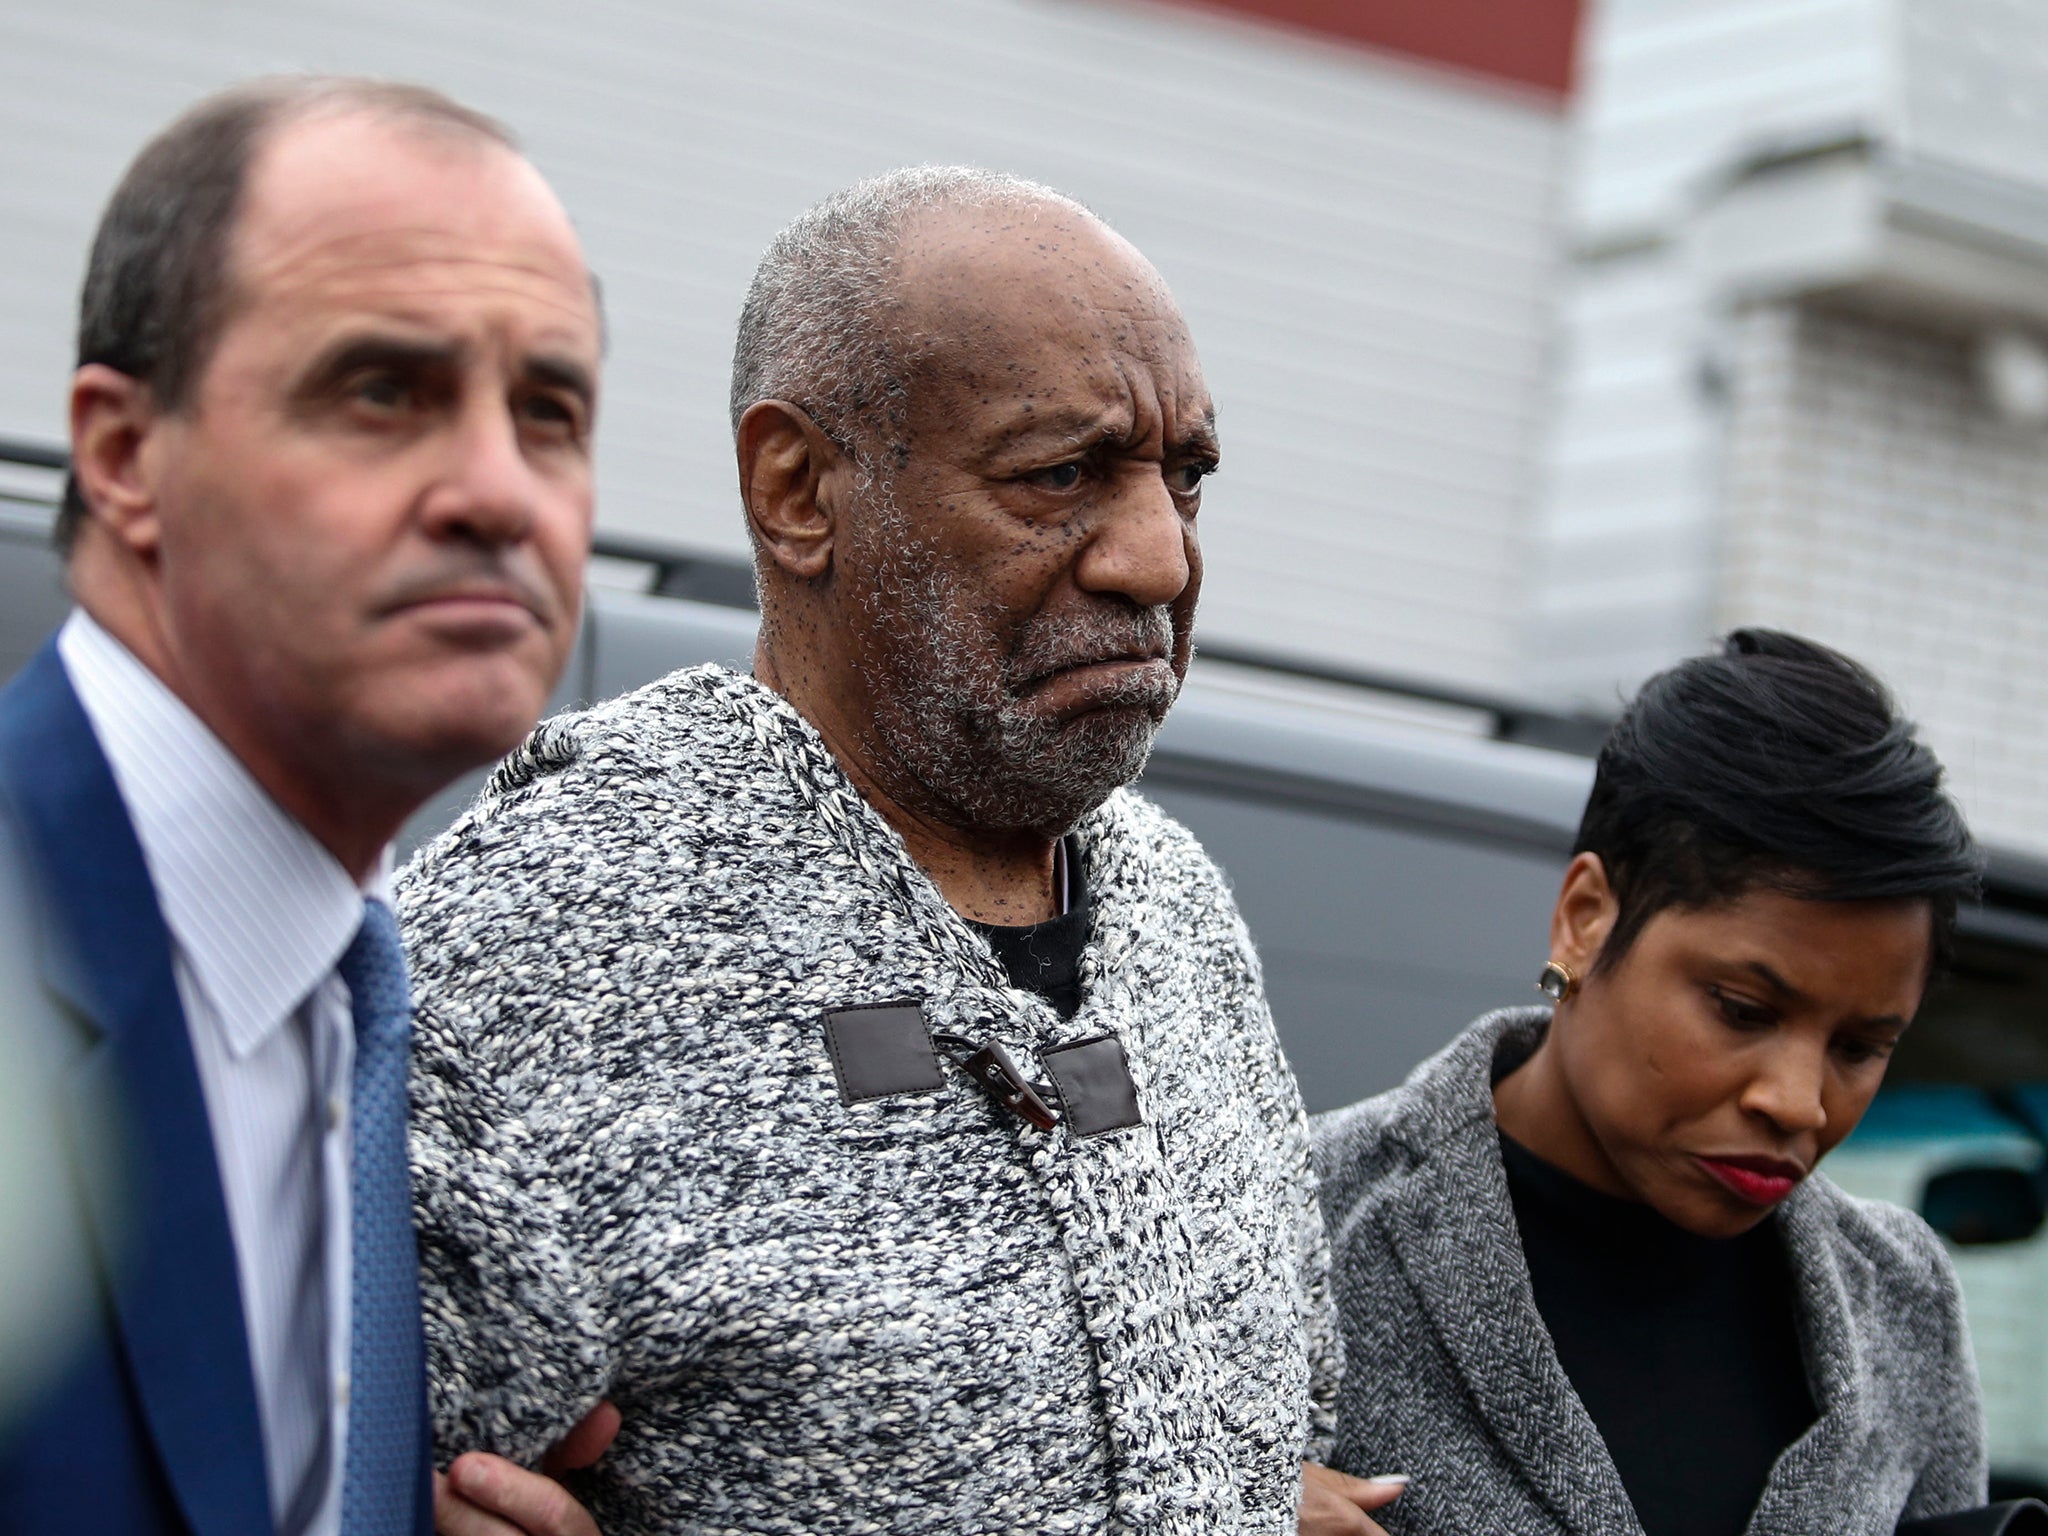 Defence lawyer Brian McMonagle (left) is going to battle for Bill Cosby